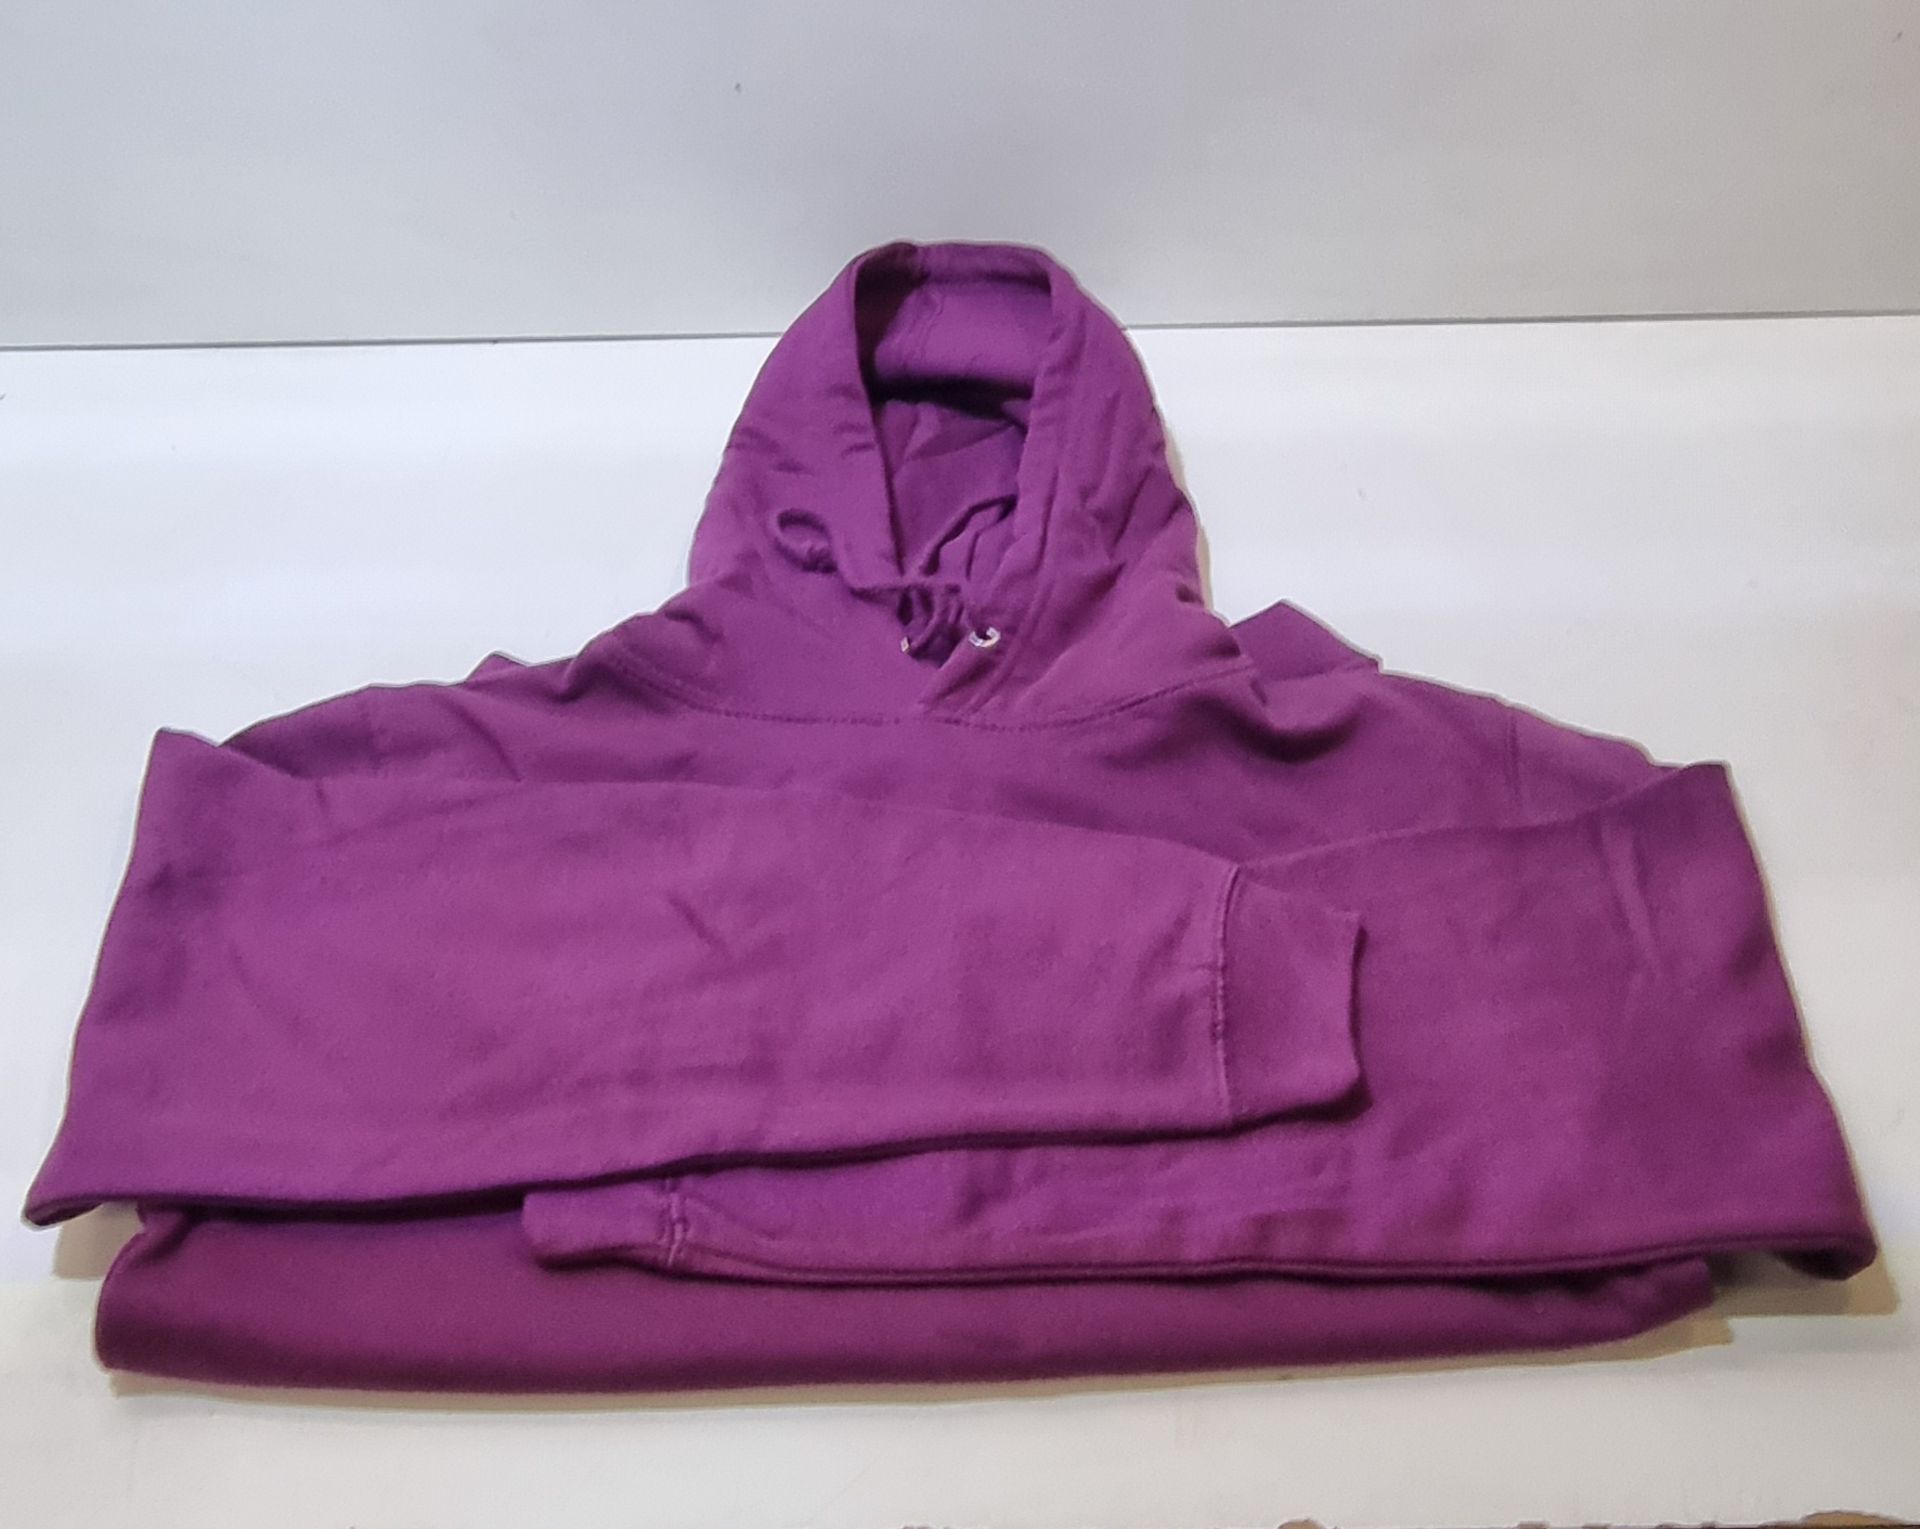 27 x Various Adult Justhoods Sweatshirts & Hoodies in Various Colours & Sizes - Image 7 of 7